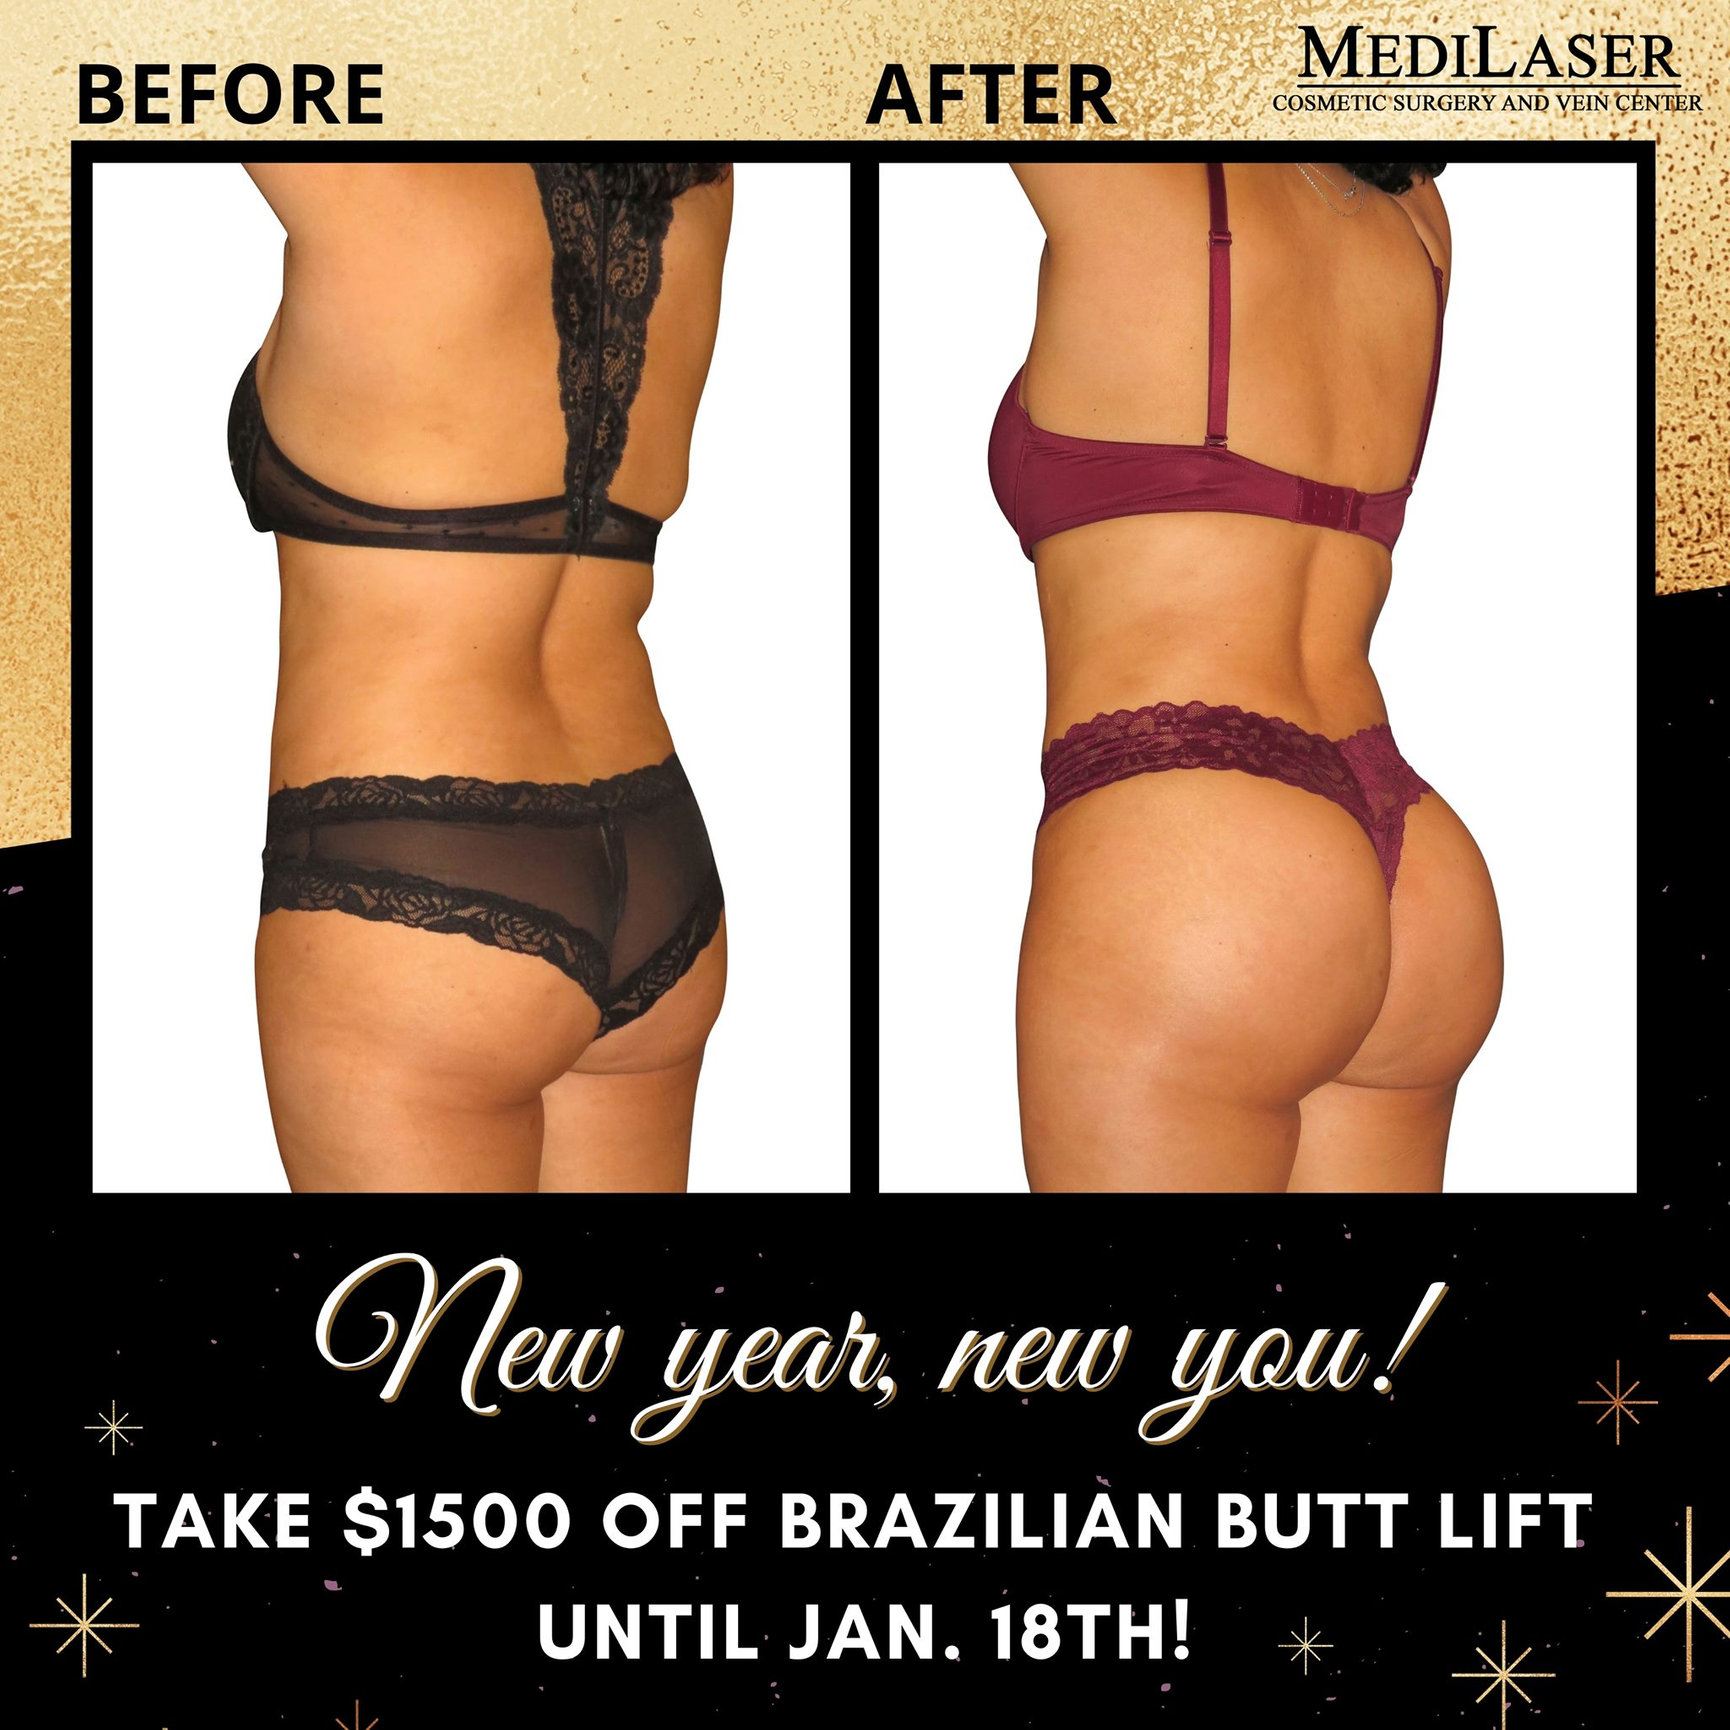 Brazilian Butt Lift Before And After - Medilaser Surgery and Vein